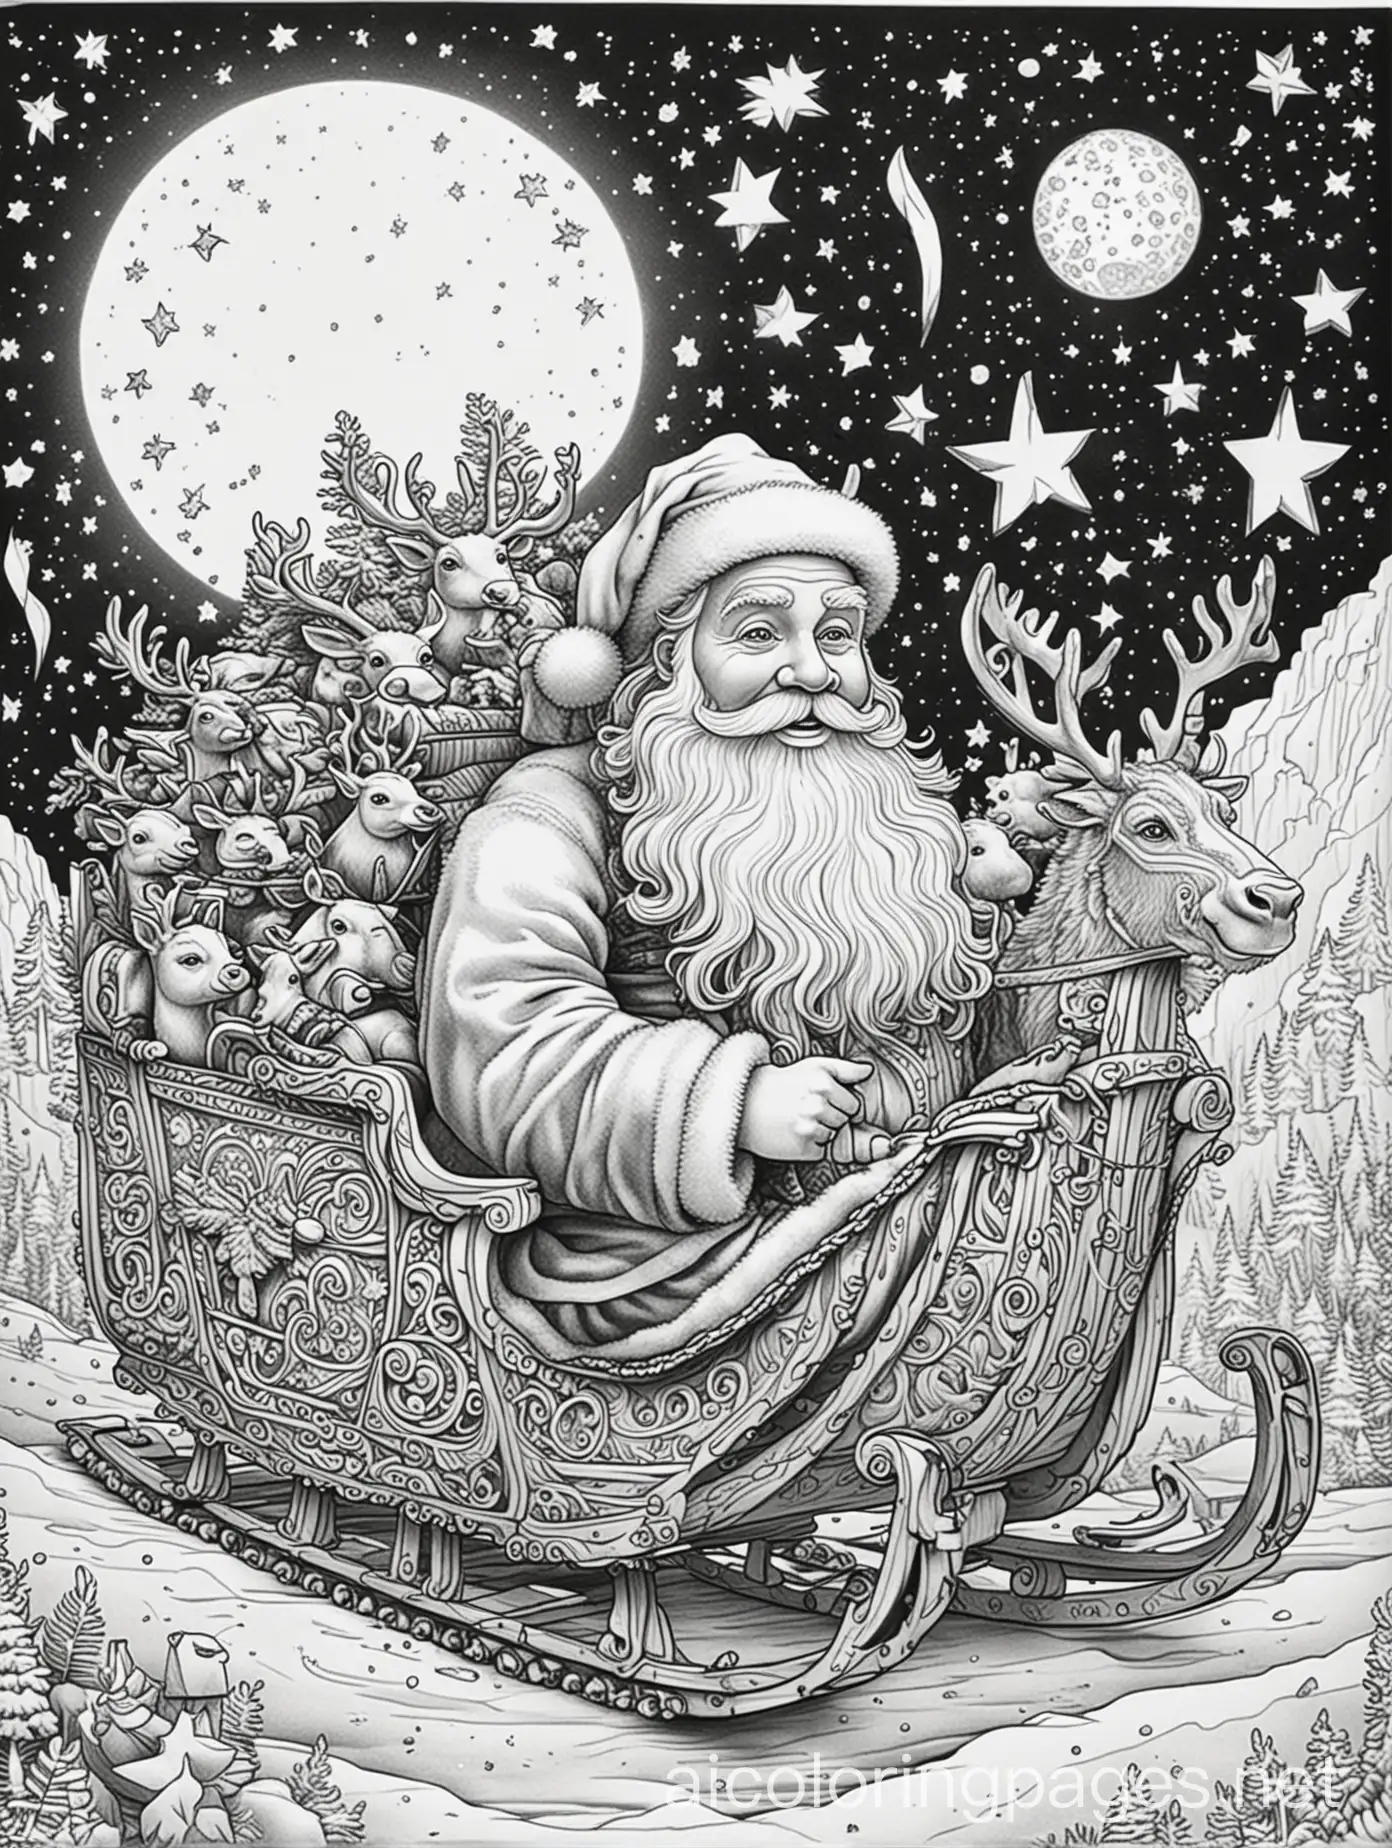 A robust, jolly Santa, sitting in his sleigh, pulled by eight tiny reindeer, on a starry snowy night, the moonlight glinting off of Santa's face, Child's coloring book, distinct thick lines so a toddler can color it, child's coloring page, black and white, ample white space, highly detailed, intricate, elaborate, thick outlines to make it easy to color, Coloring Page, black and white, line art, white background, Simplicity, Ample White Space. The background of the coloring page is plain white to make it easy for young children to color within the lines. The outlines of all the subjects are easy to distinguish, making it simple for kids to color without too much difficulty, Coloring Page, black and white, line art, white background, Simplicity, Ample White Space. The background of the coloring page is plain white to make it easy for young children to color within the lines. The outlines of all the subjects are easy to distinguish, making it simple for kids to color without too much difficulty